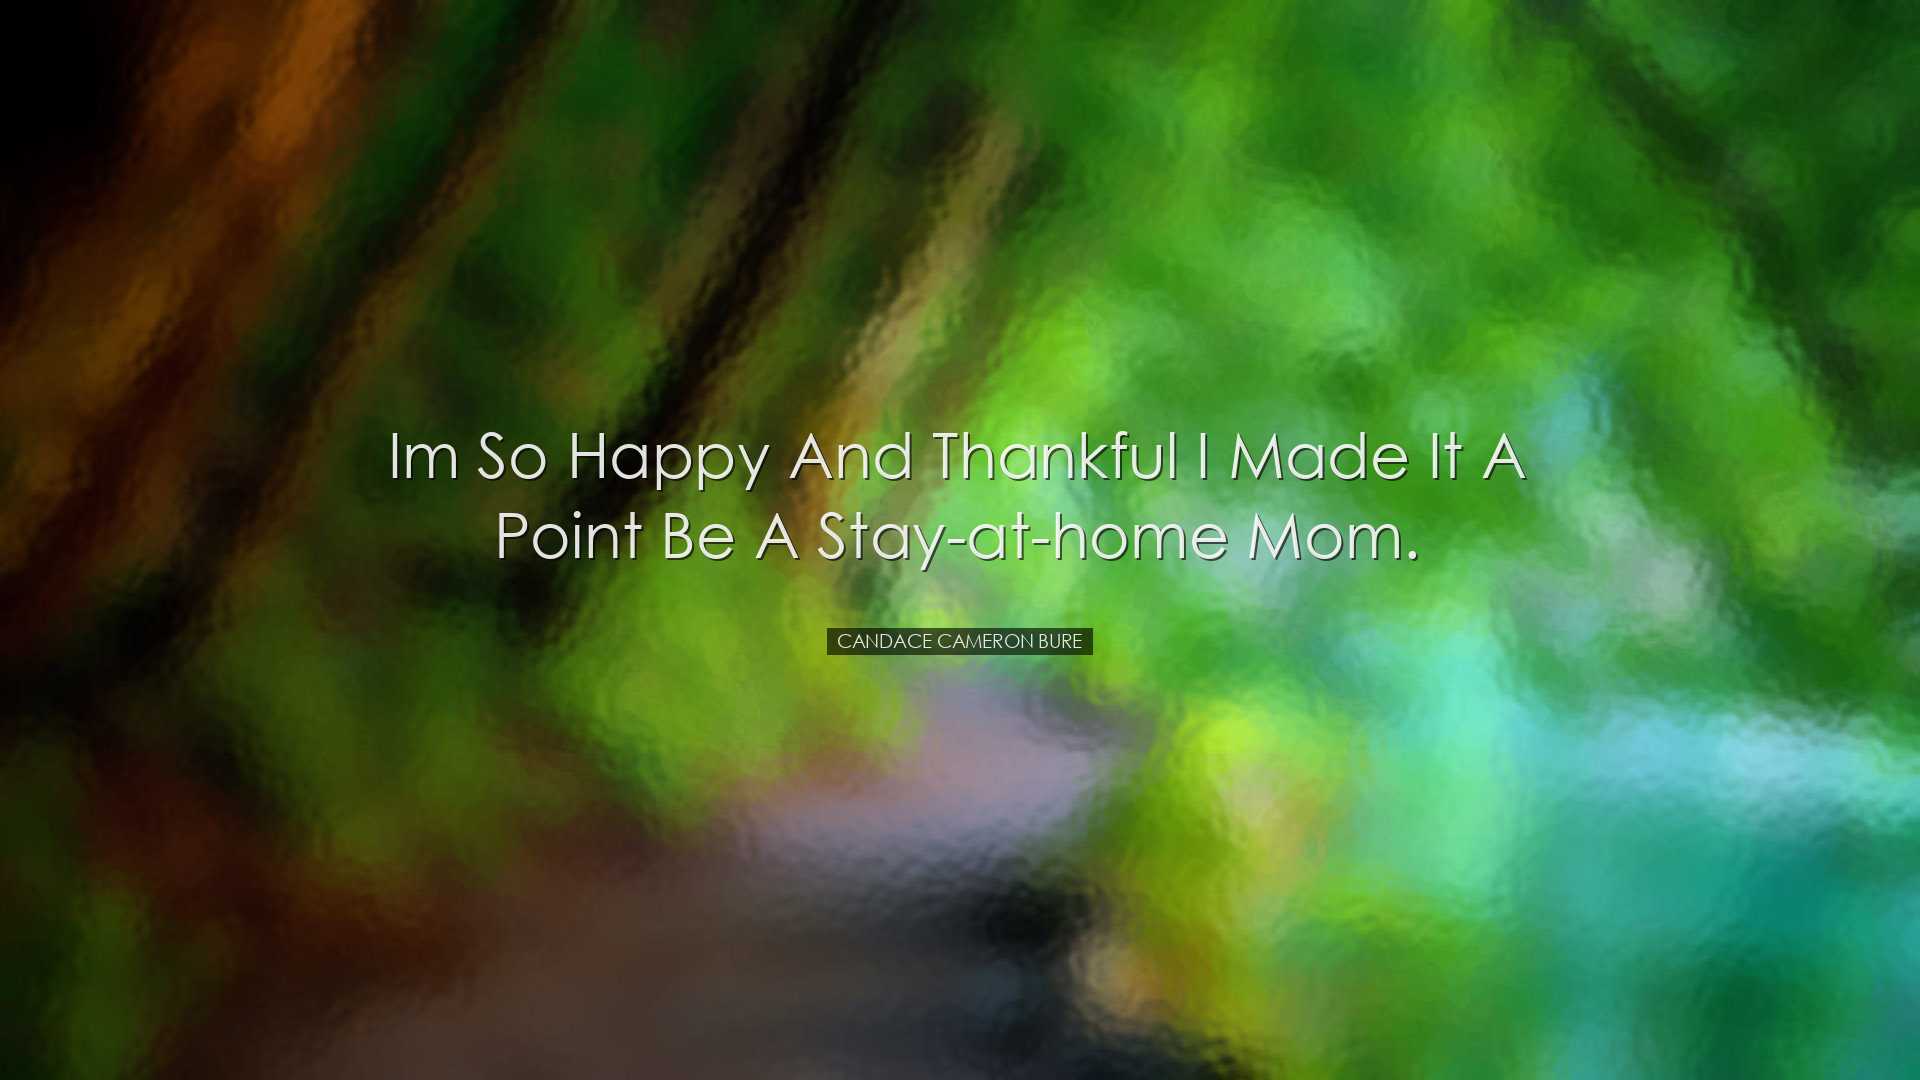 Im so happy and thankful I made it a point be a stay-at-home mom.